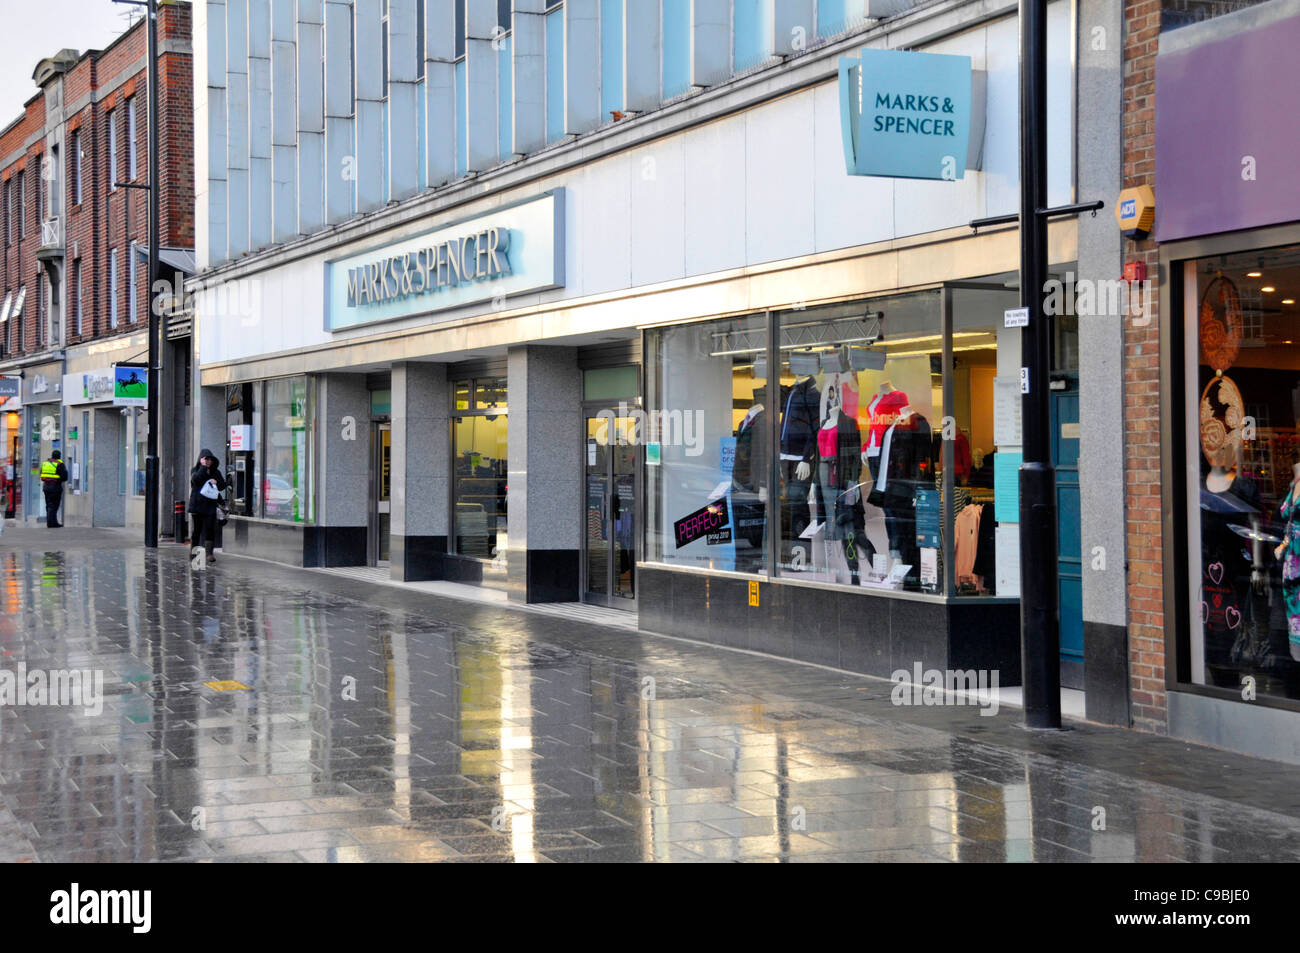 Marks & Spencer shopping High Street store shop window pavement reflections on a rainy January winters day Essex England UK Stock Photo